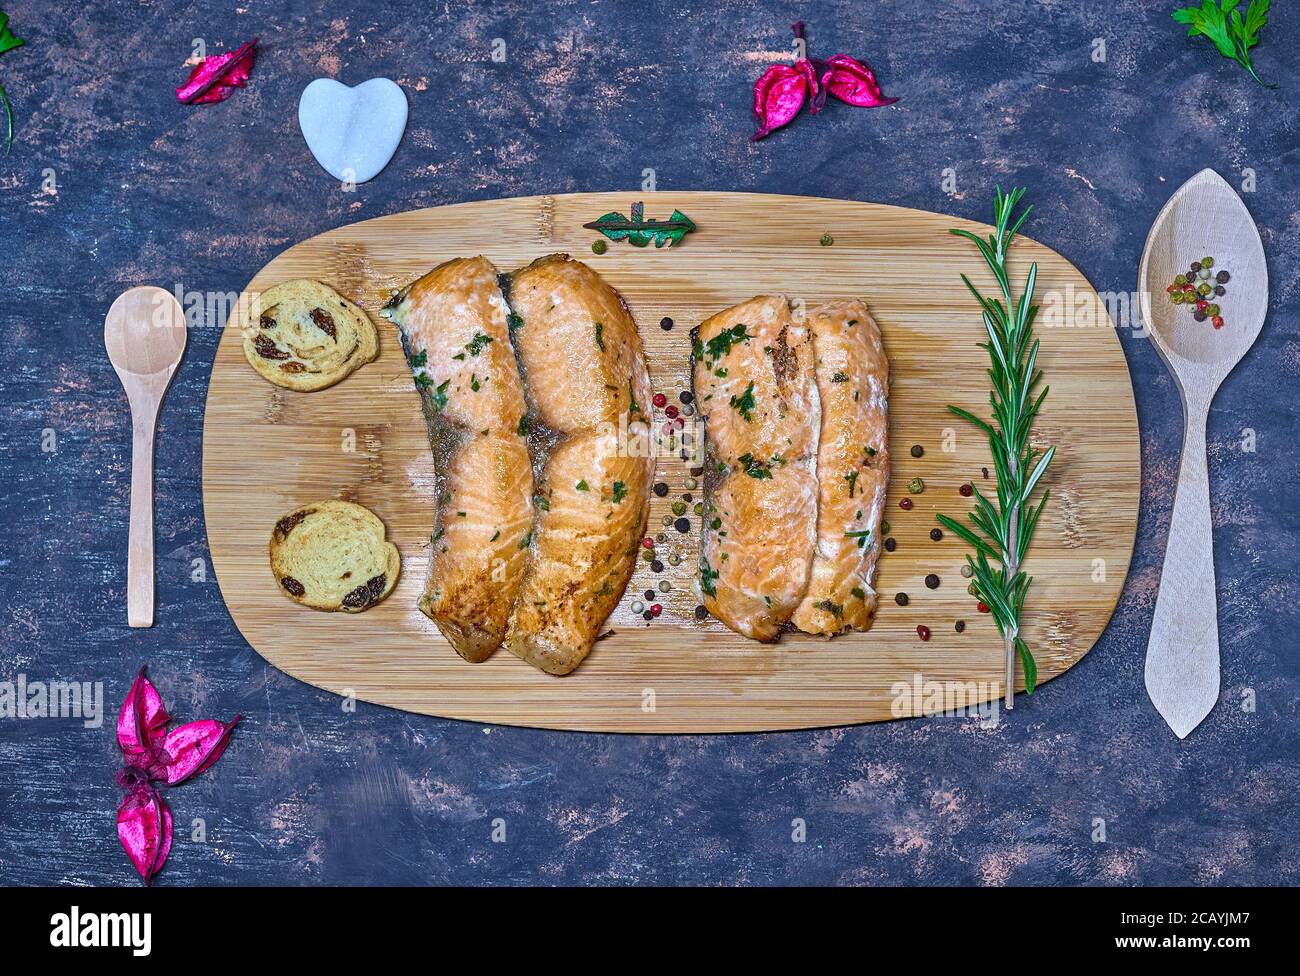 A wood dish with a salmon to dinner today Stock Photo